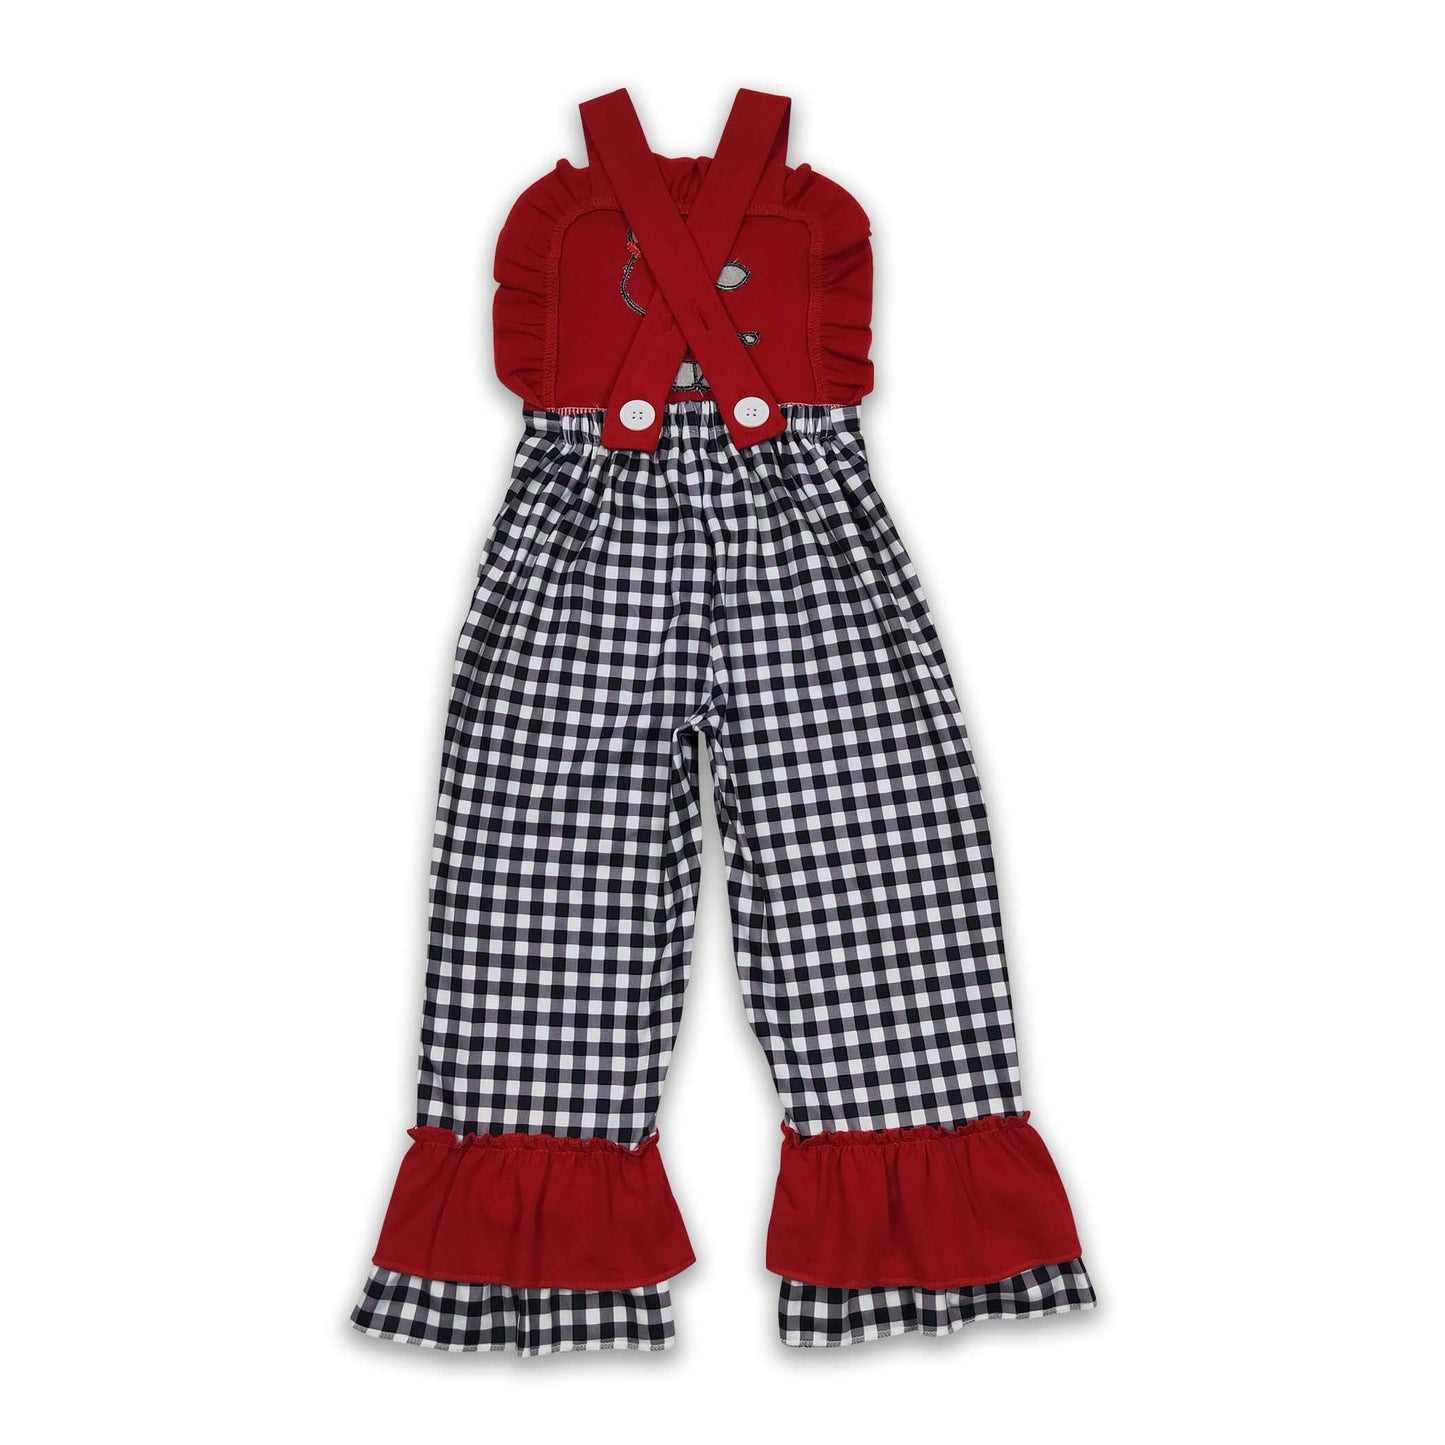 Cow embroidery plaid ruffle baby girls overalls